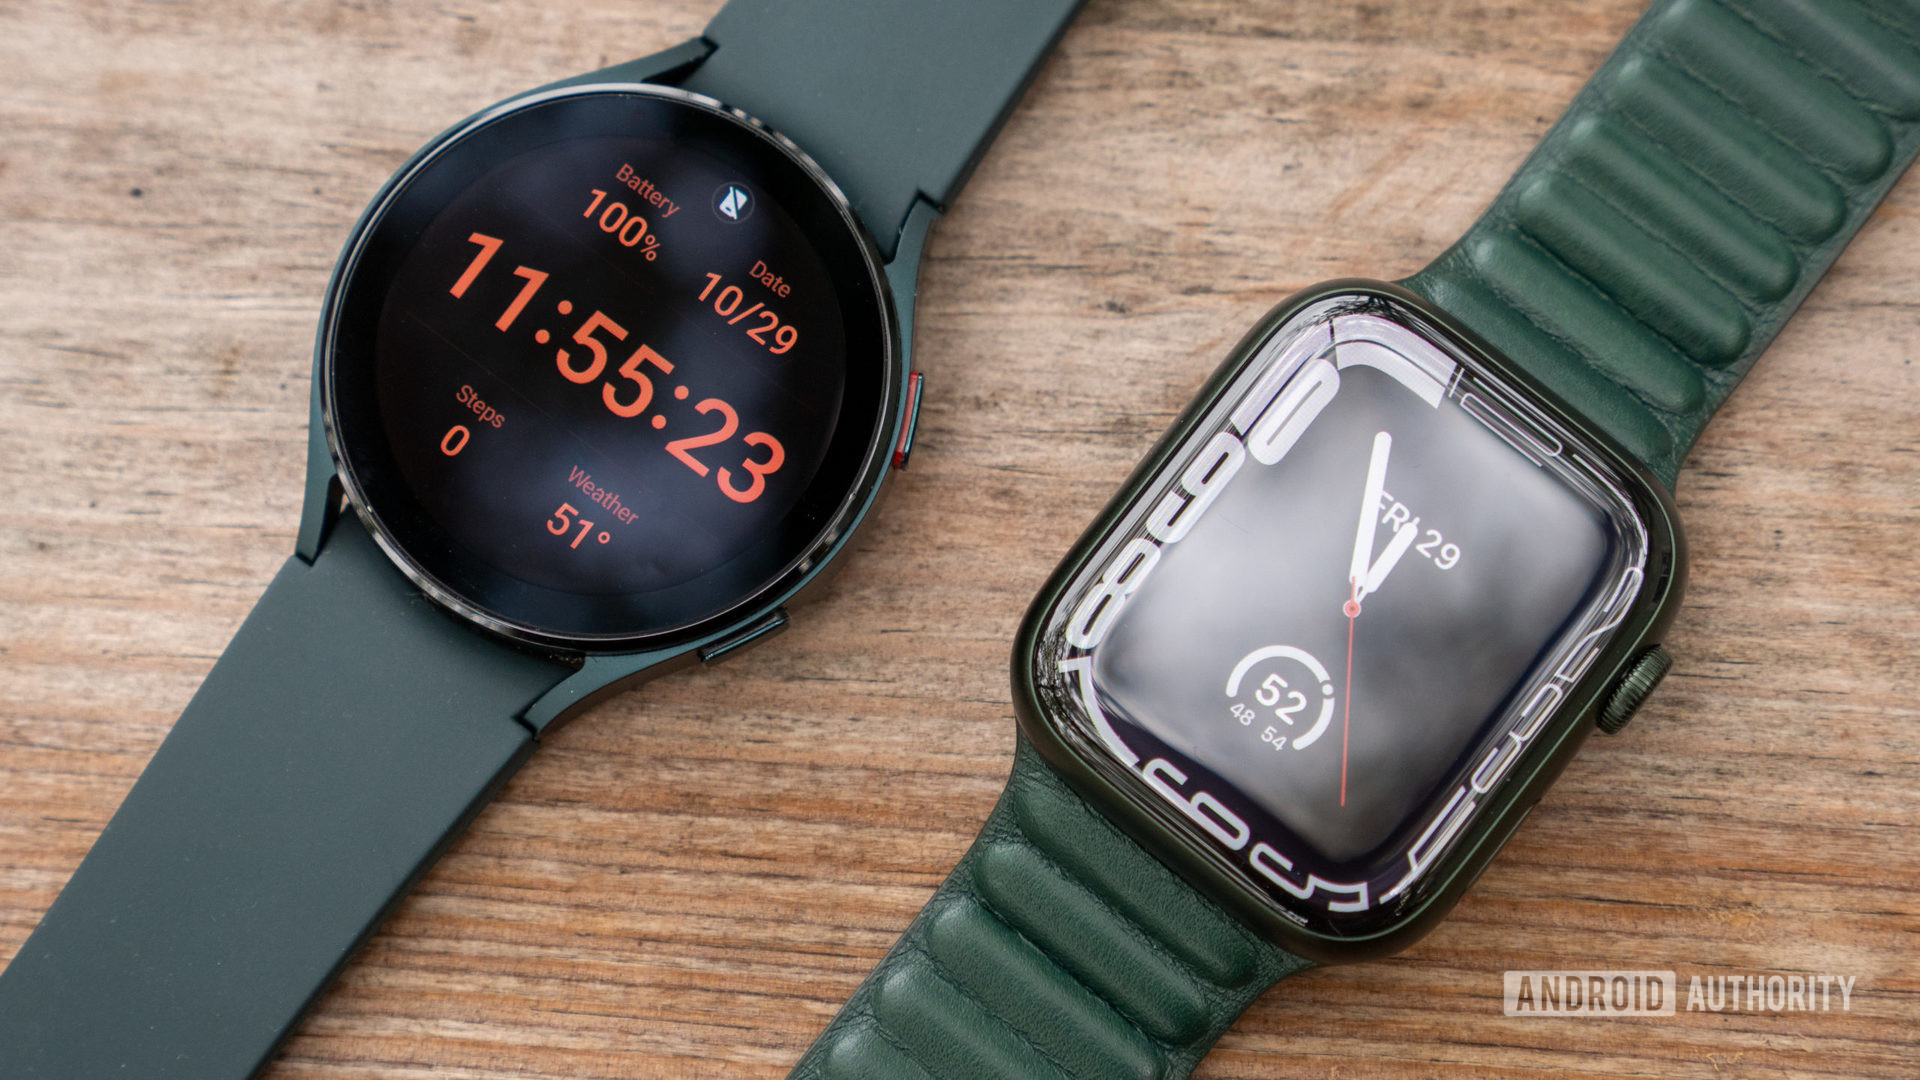 Apple watch series 7 vs samsung galaxy watch 4 display watch face on table 1